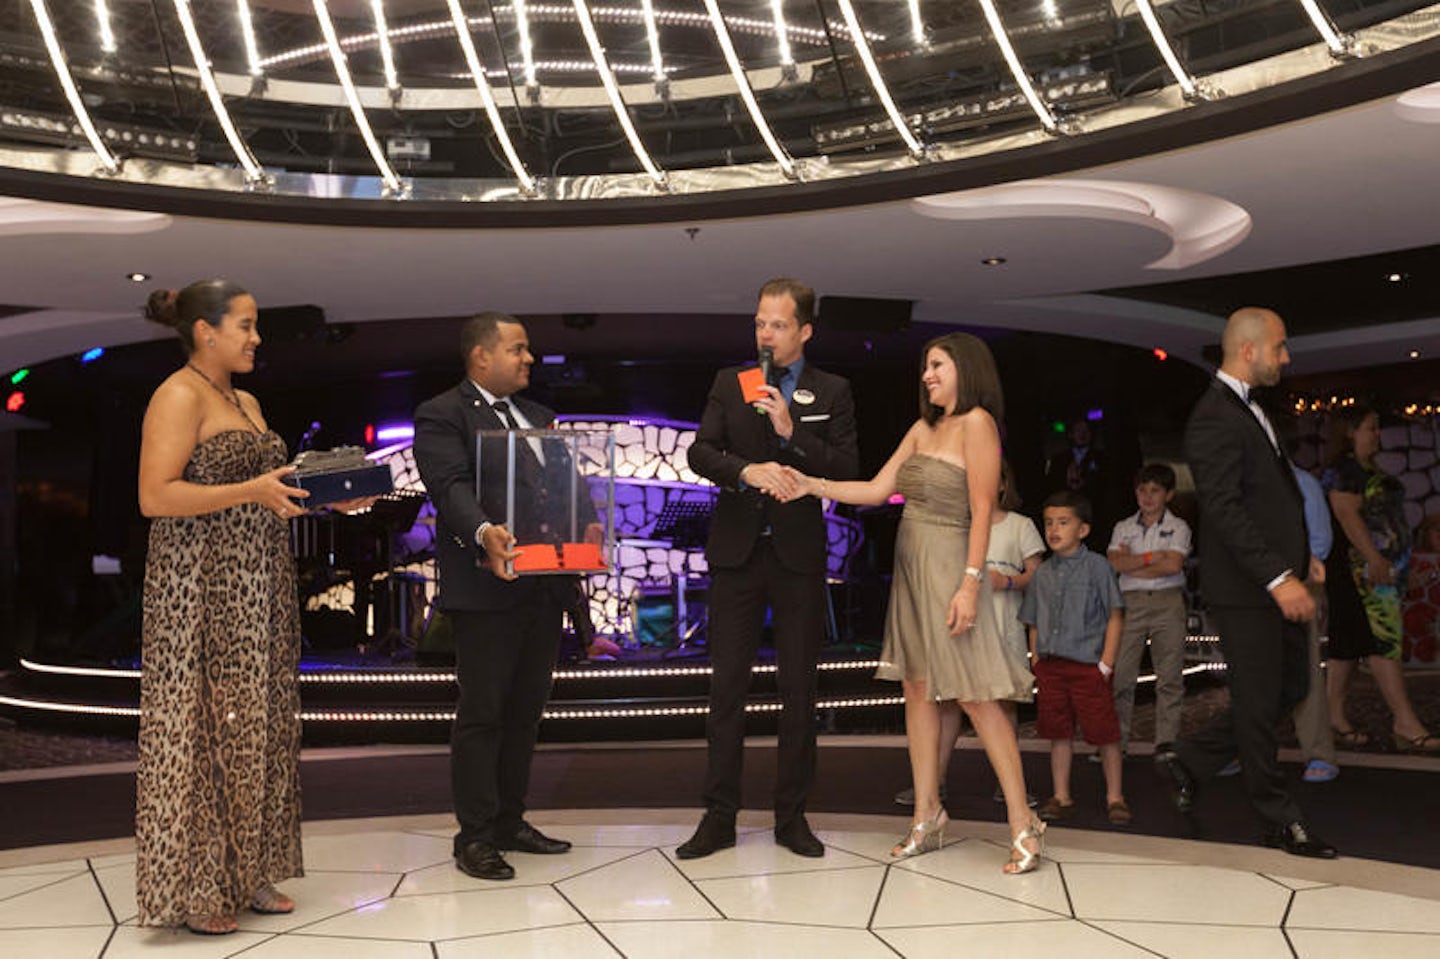 Dance with the Officers on MSC Divina